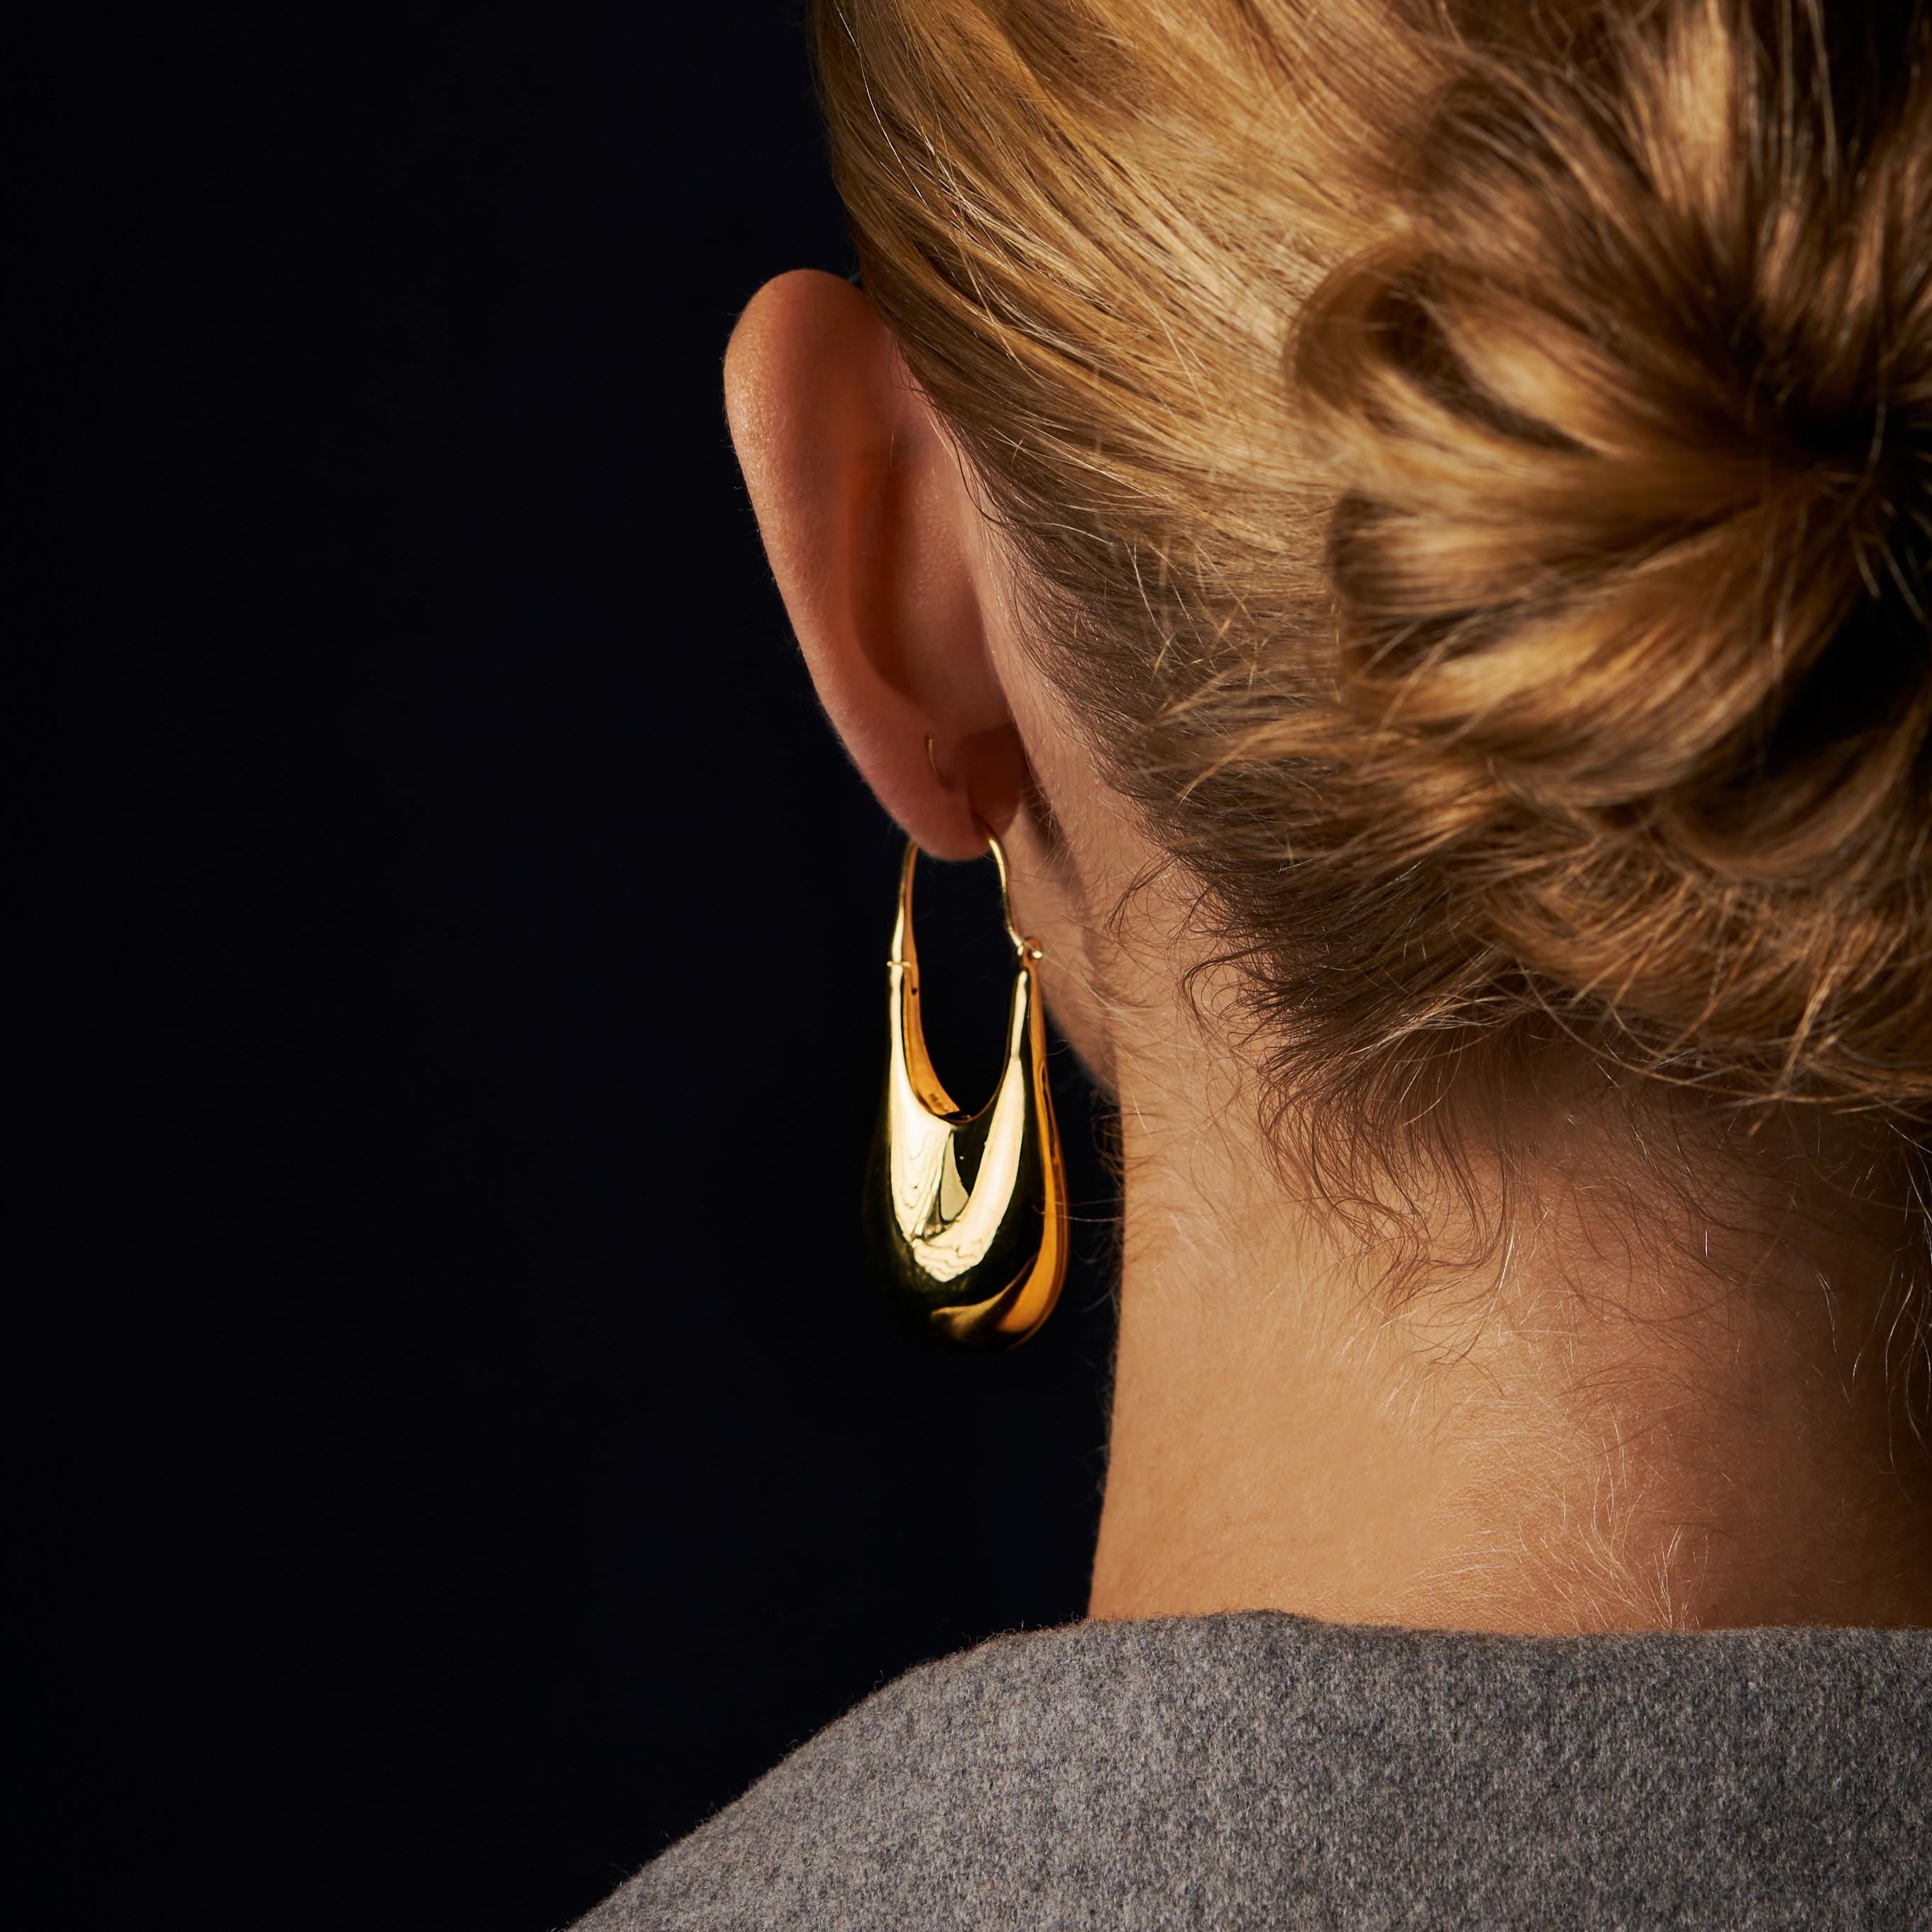 Also available in recycled sterling silver, 18k gold with MPINGO Blackwood, as well as in small size.

This statement earring collection arose from a design collaboration between KINRADEN and Danish fashion designer Mark Kenly Domino Tan. Impeccable